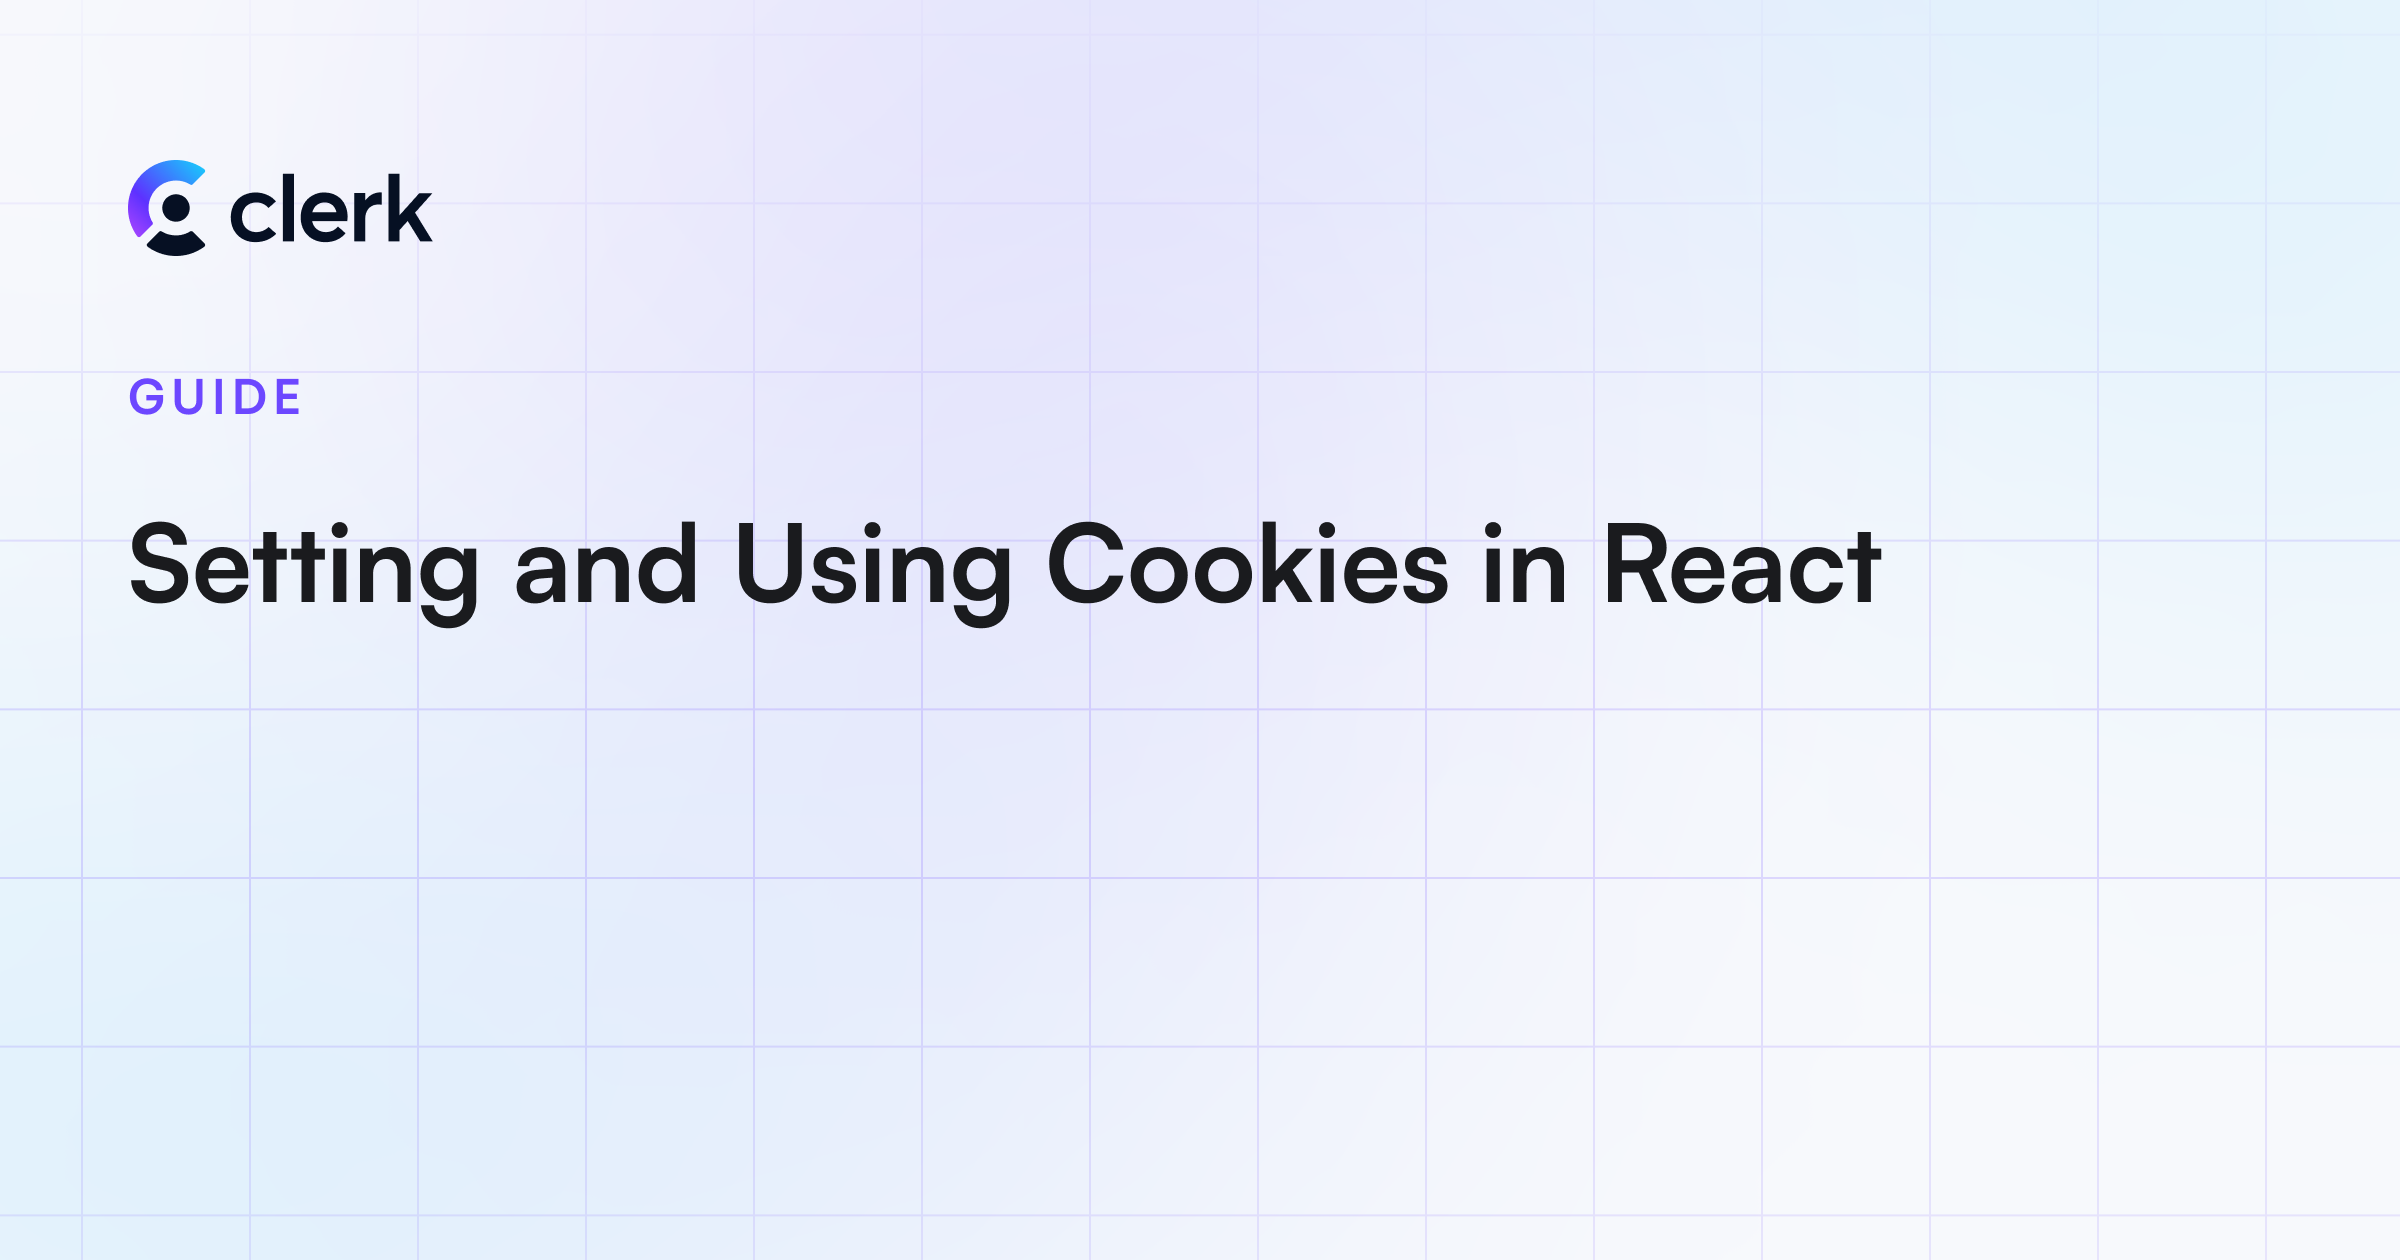 View, add, edit, and delete cookies, DevTools